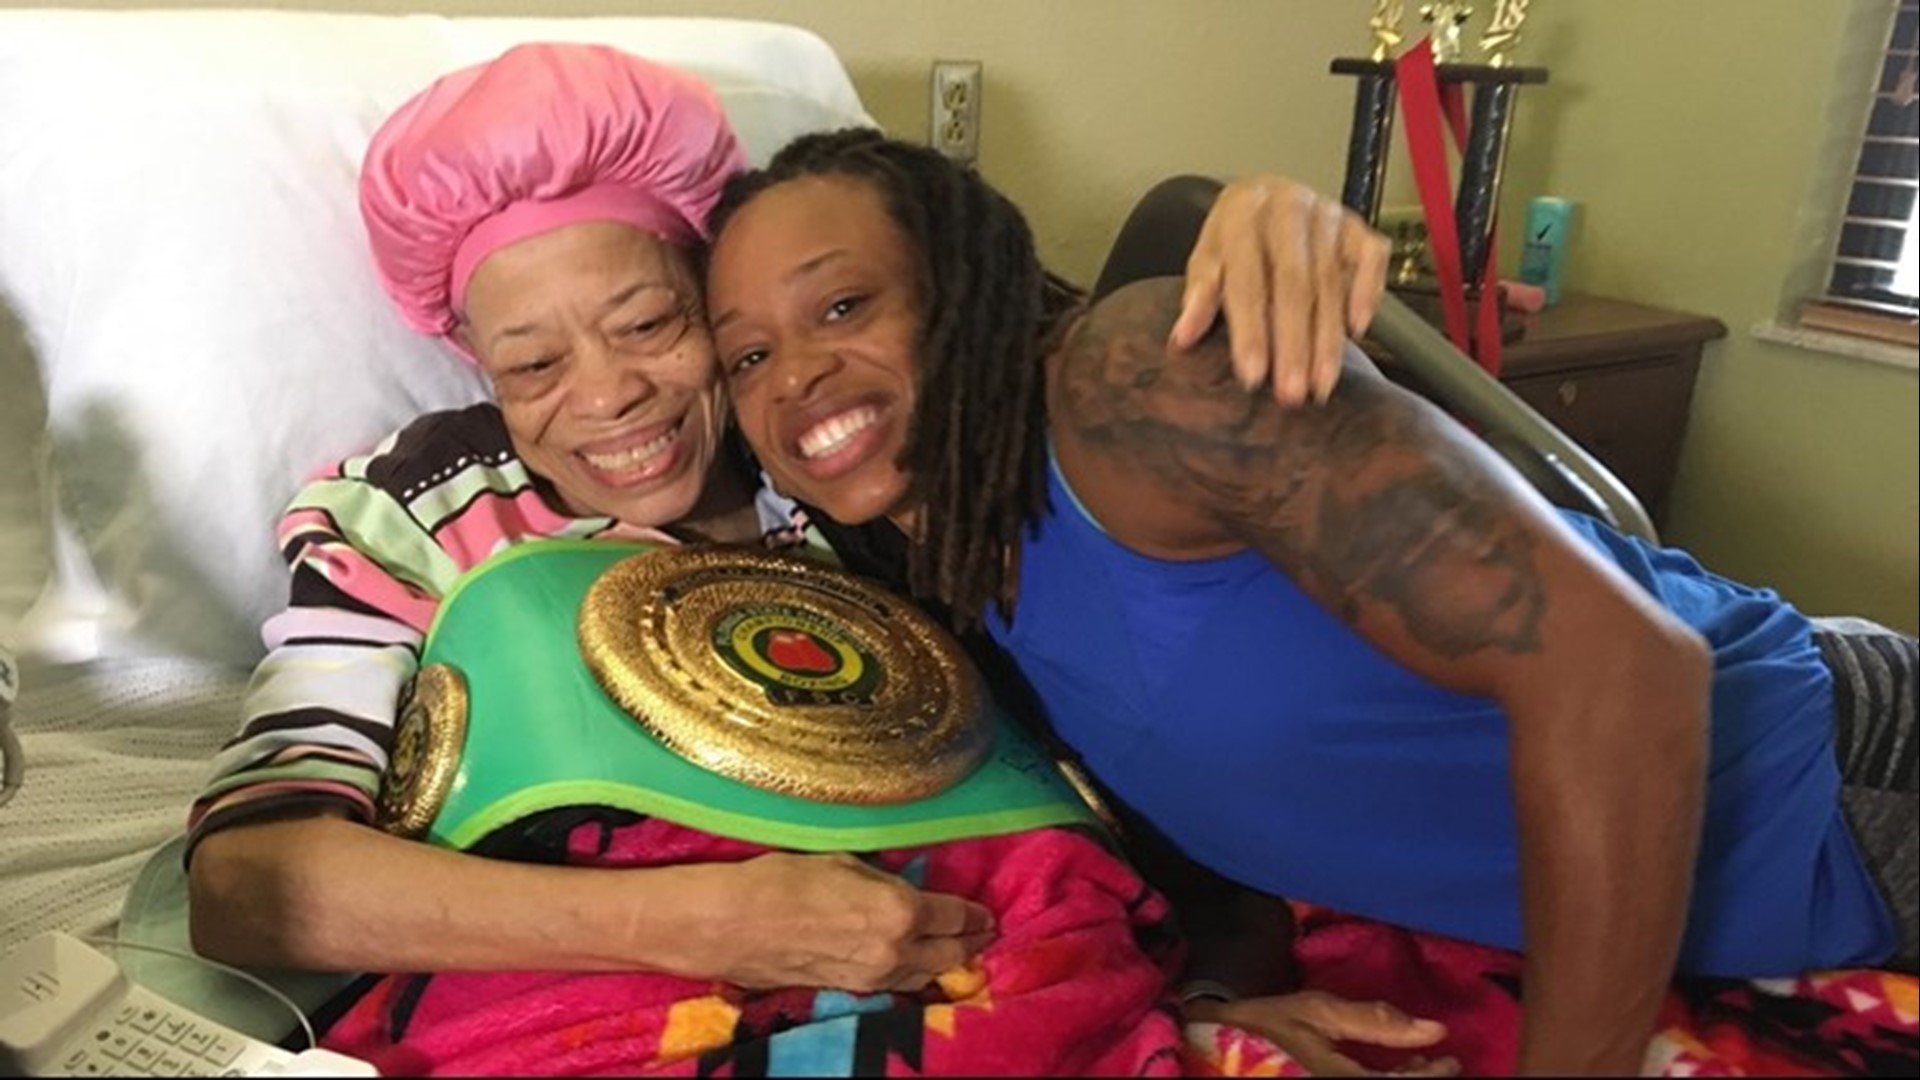 Carisse Brown is looking forward to her first professional boxing match on Sept. 12. She's dedicating the fight to her mother, Ollie, who died on Jan. 31.